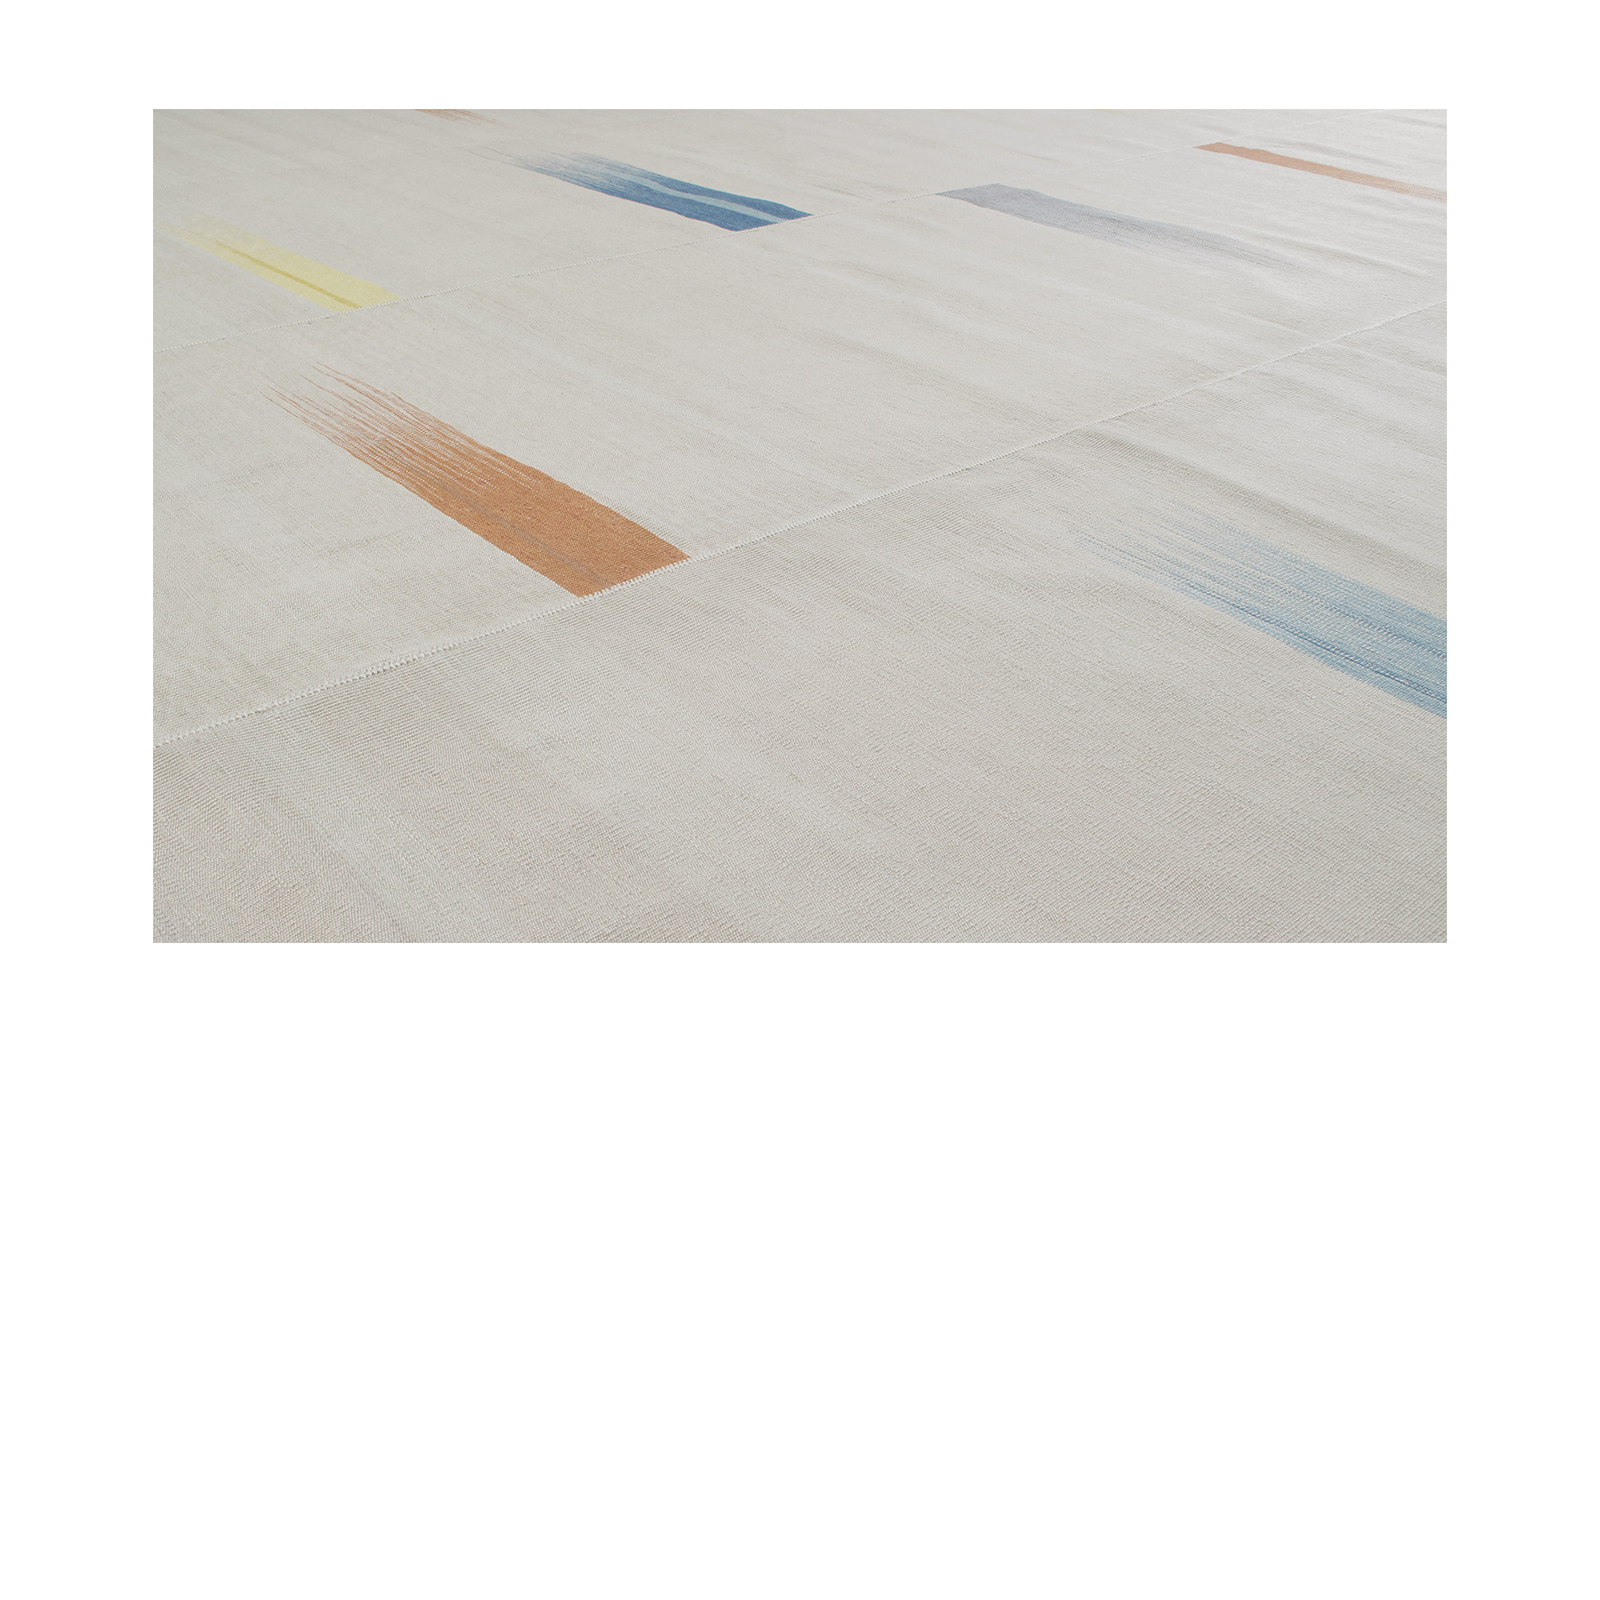 This Mazandaran rug is highlights the minimalist sophistication that existed long before the modern era. 